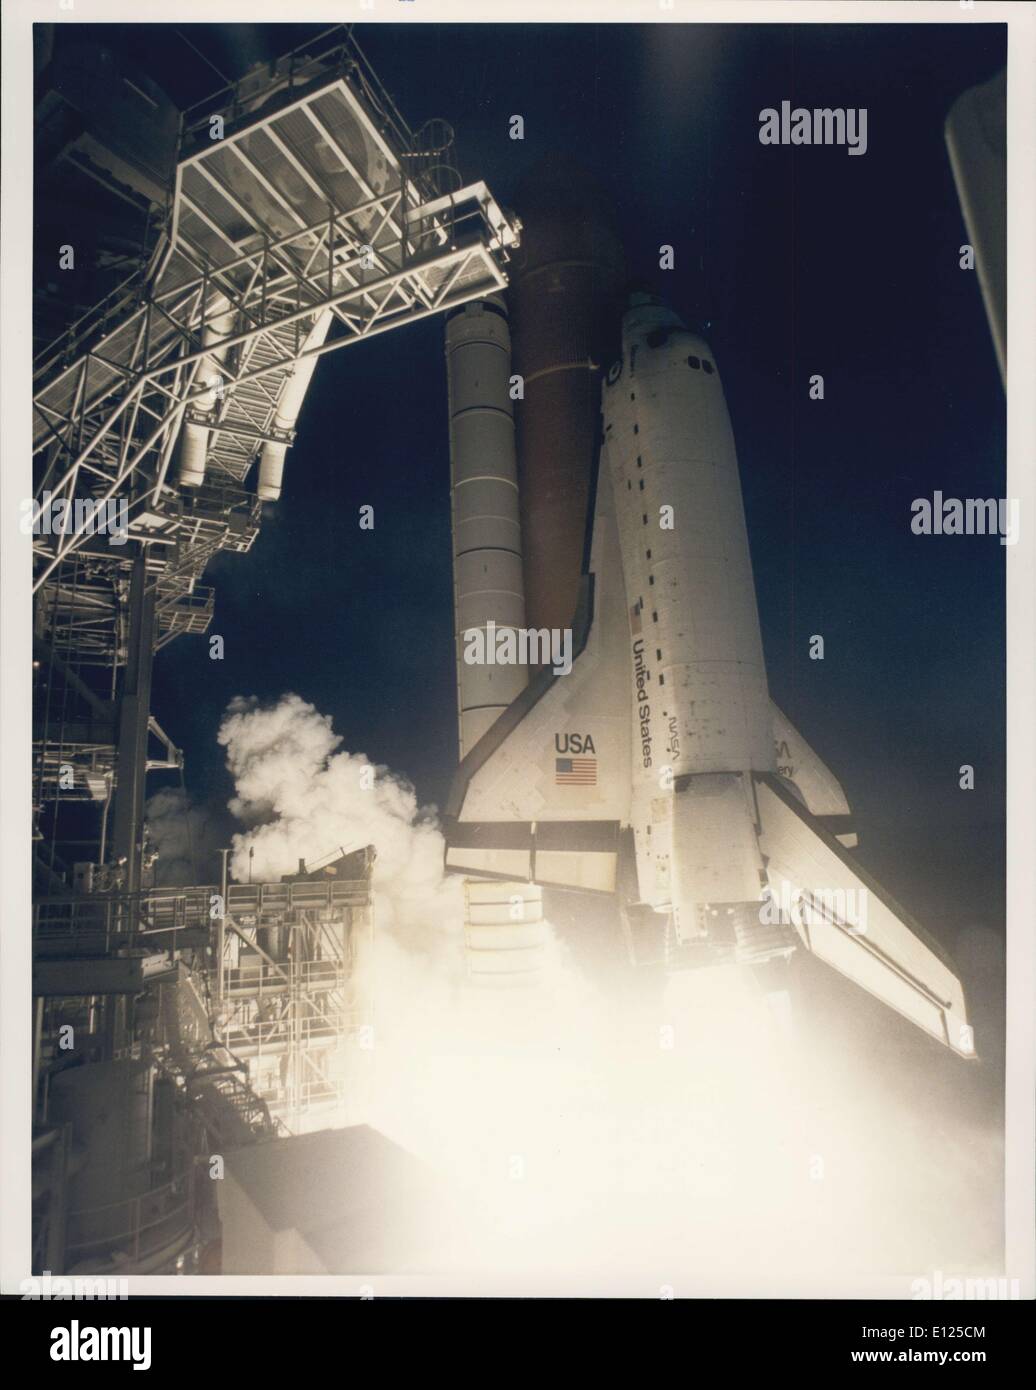 Feb. 03, 1994 - Kennedy Space Center, FLA. - A golden new era in space cooperation begins with a flawless countdown and the ontime liftoff of the Space Shuttle Discovery on Mission STS-60. Liftoff from Launch Pad 39A occured at 7:10:01 a.m., EST. The first Shuttle mission of 1994 carries the first Russian cosmonaut, Sergei K. Krikalev, to fly on the Space Shuttle. The veteran space traveler joins astronauts N. Jan Davis and Ronald M. Sega, mission specialists; Franklin R. Chang-Diaz, payload commander: Kenneth S. Reightler, pilot; and Charles F. Bolden Jr Stock Photo